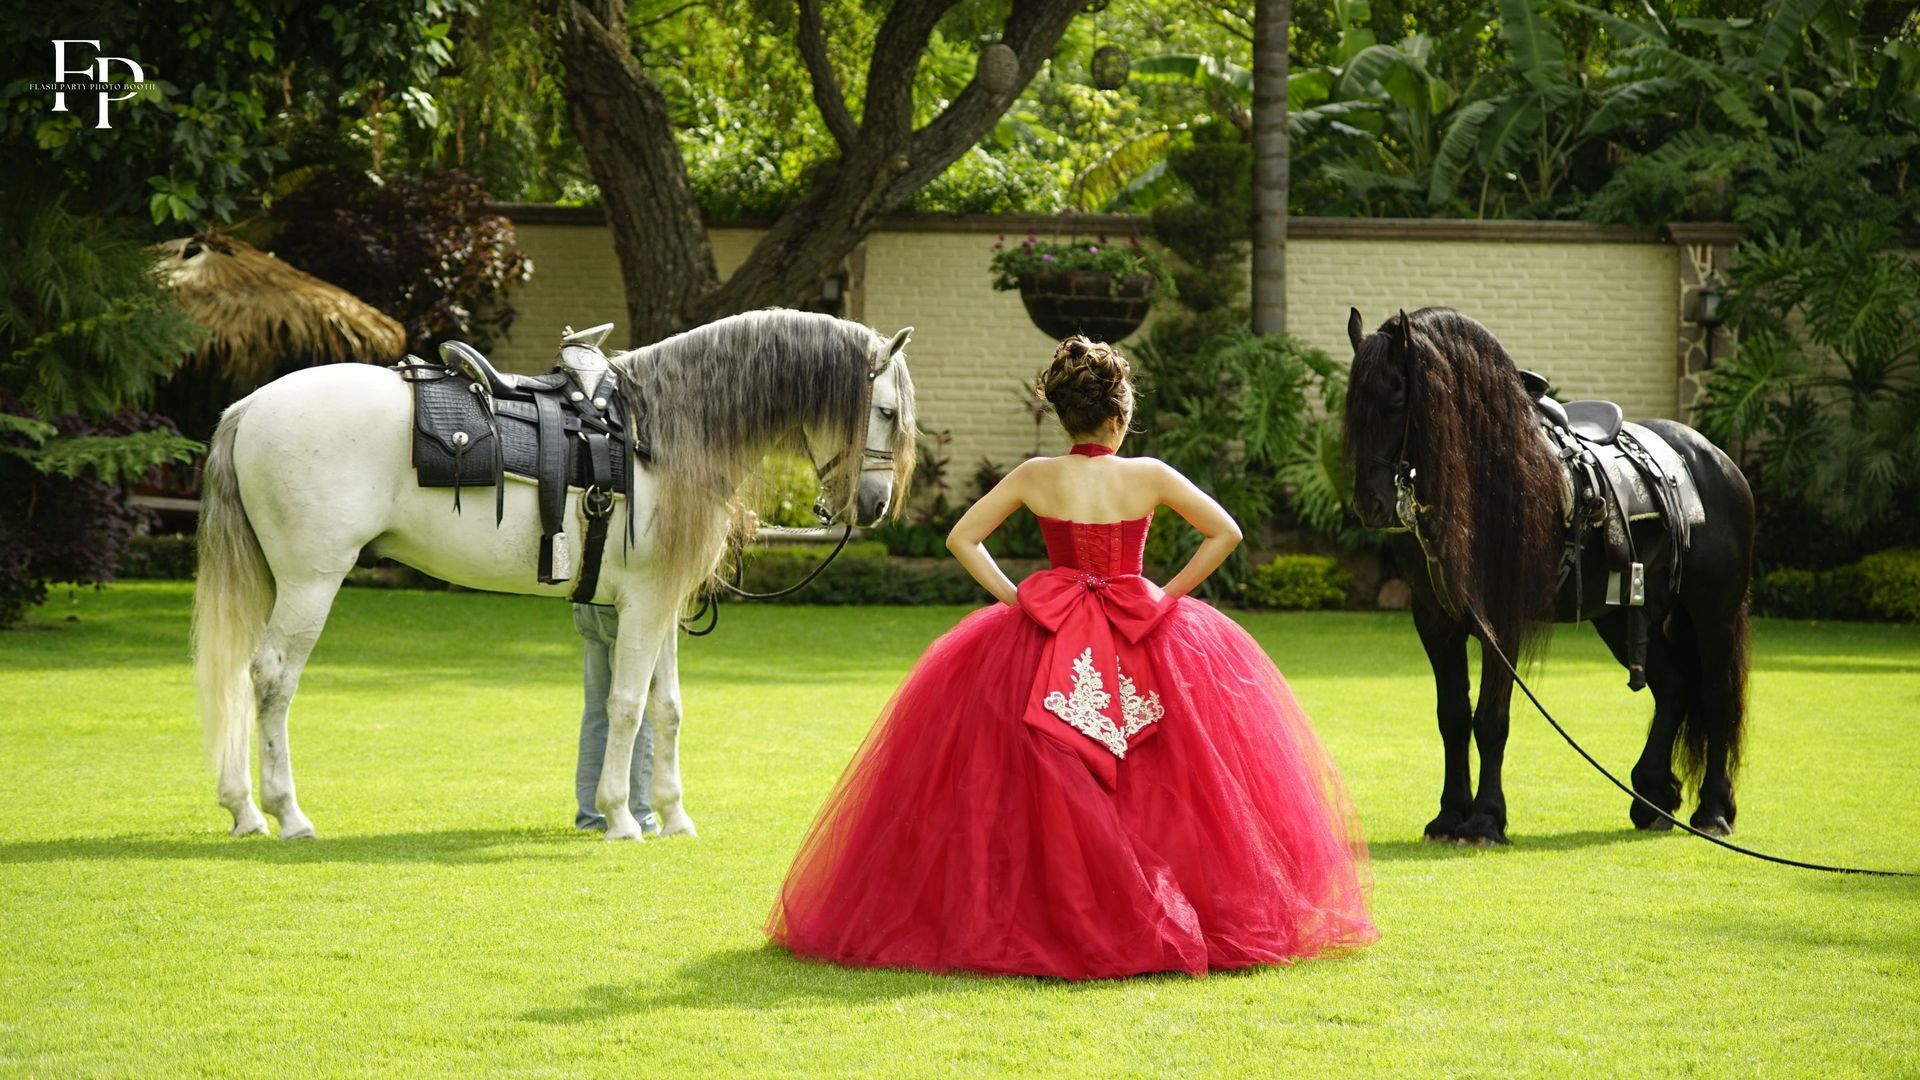 A Quinceañera in San Antonio enjoys her big day with two magnificent horses in the background.